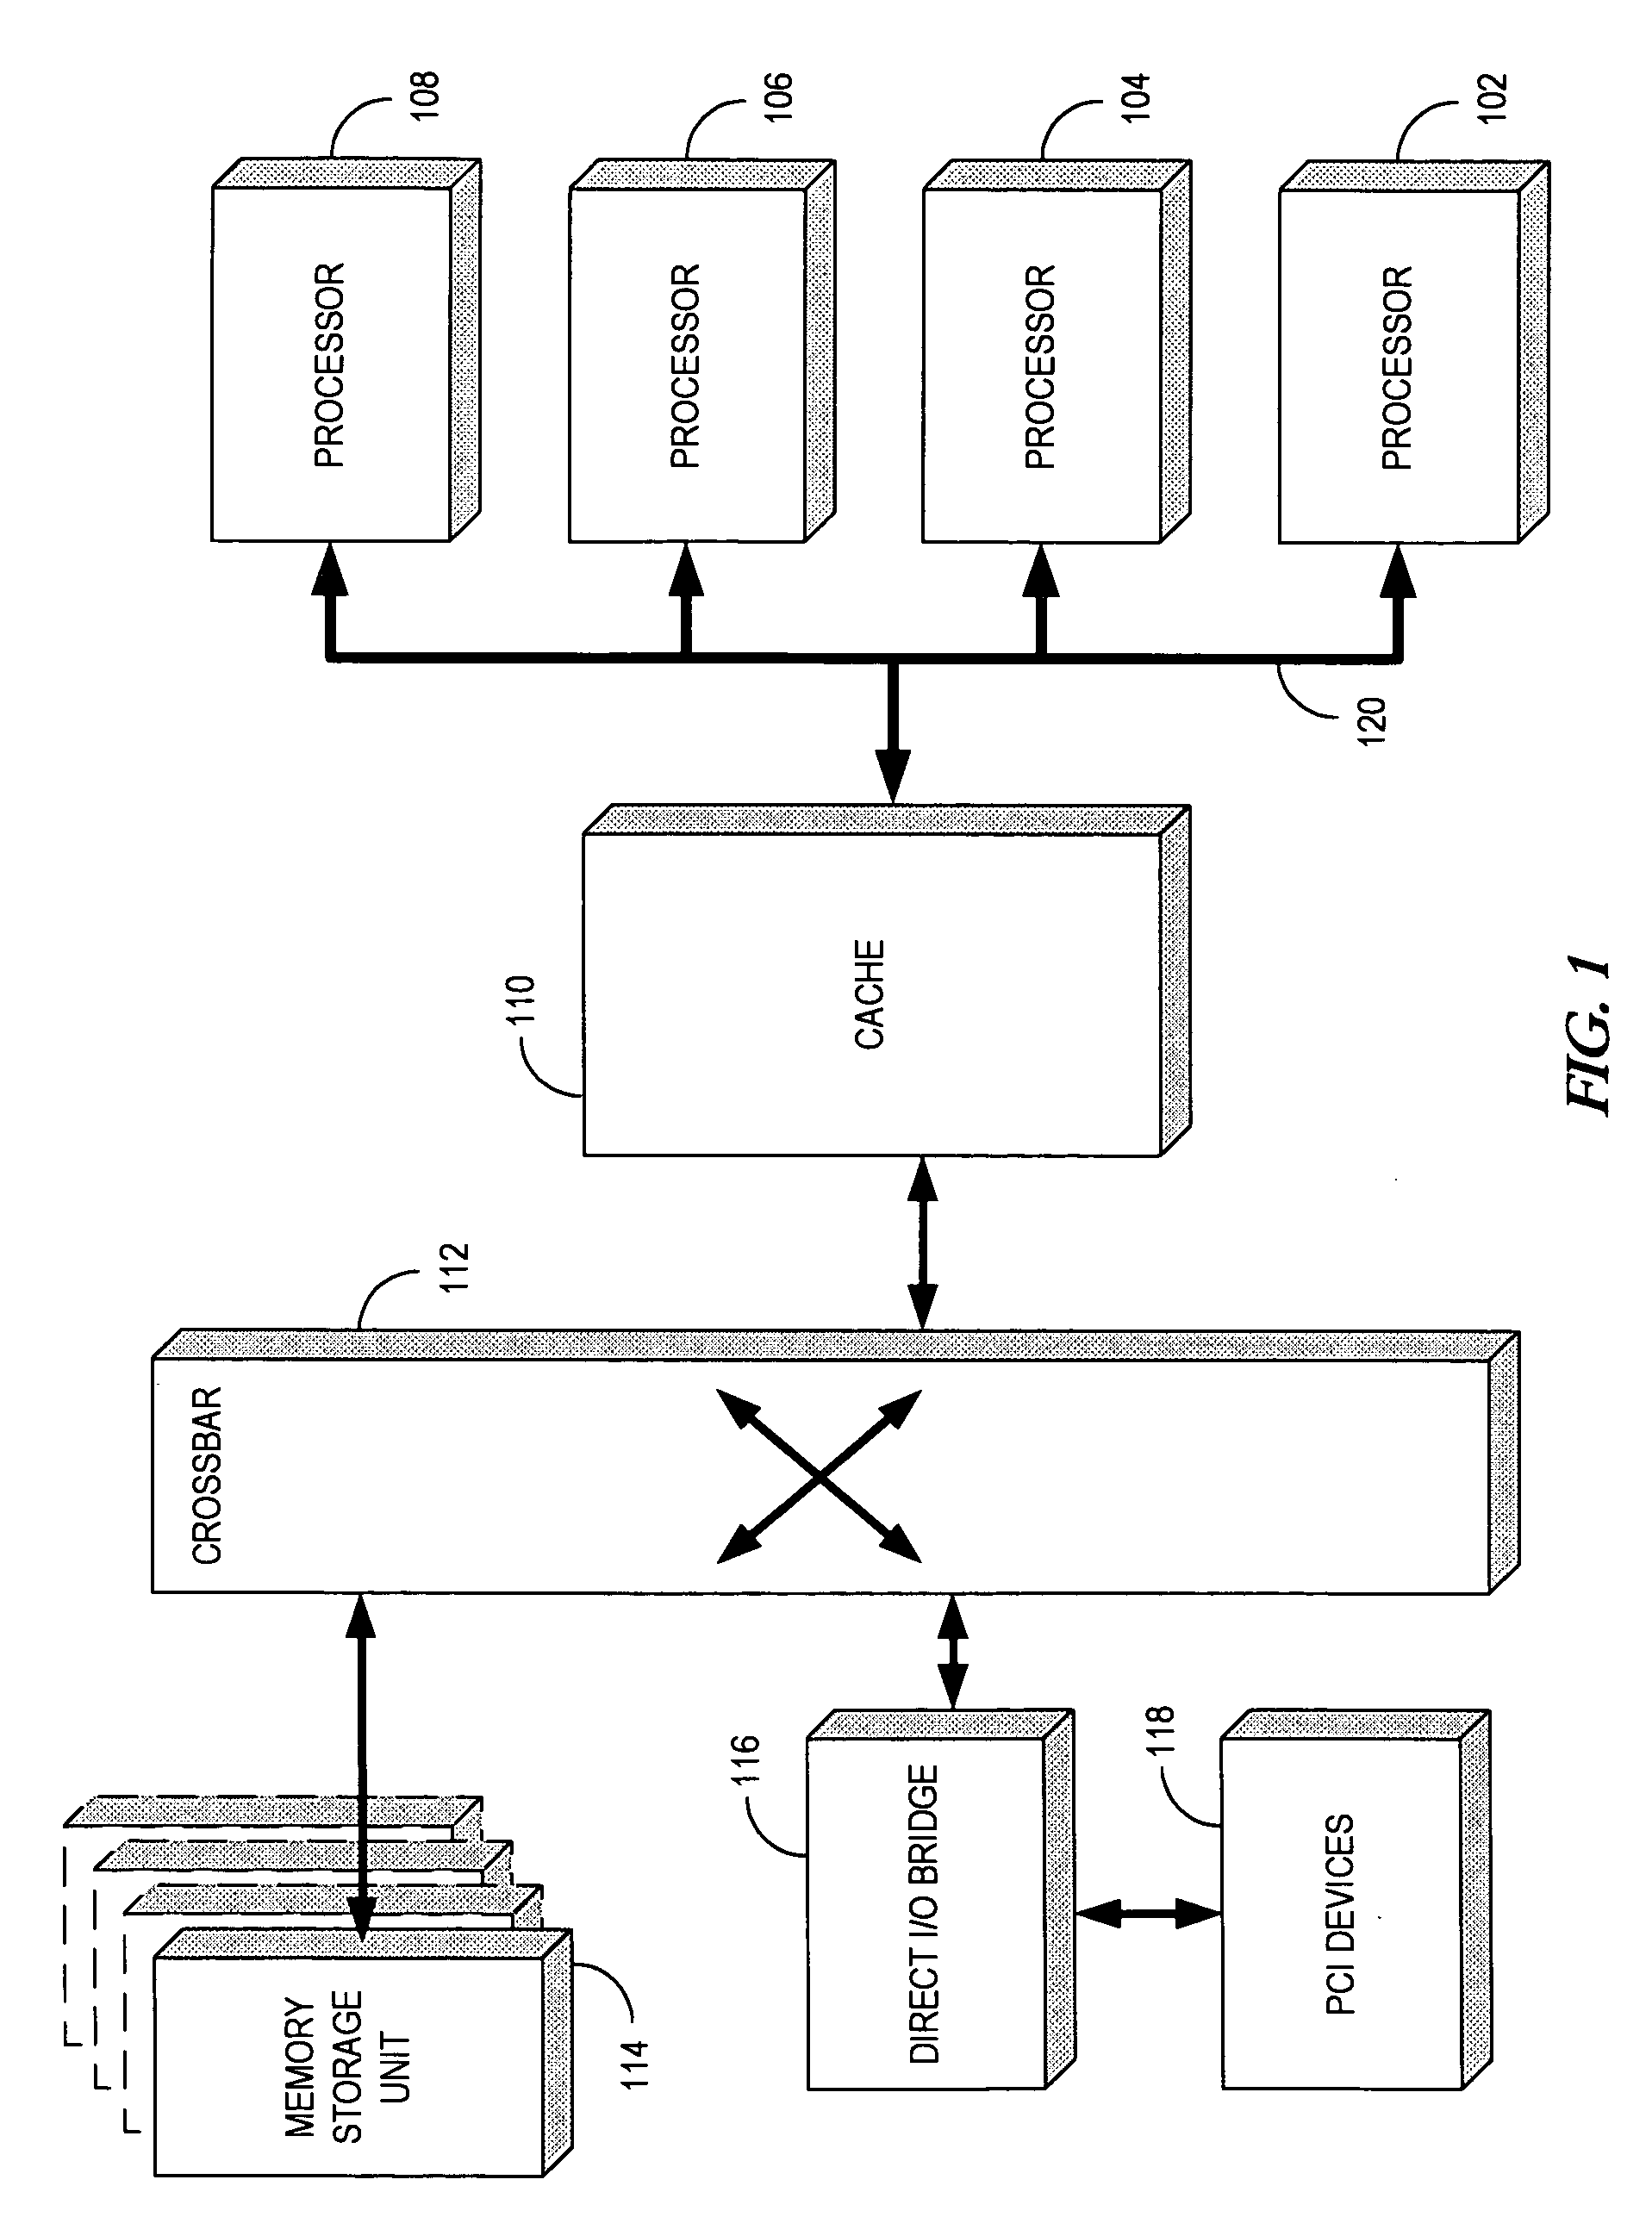 Method and apparatus for providing overlapping defer phase responses